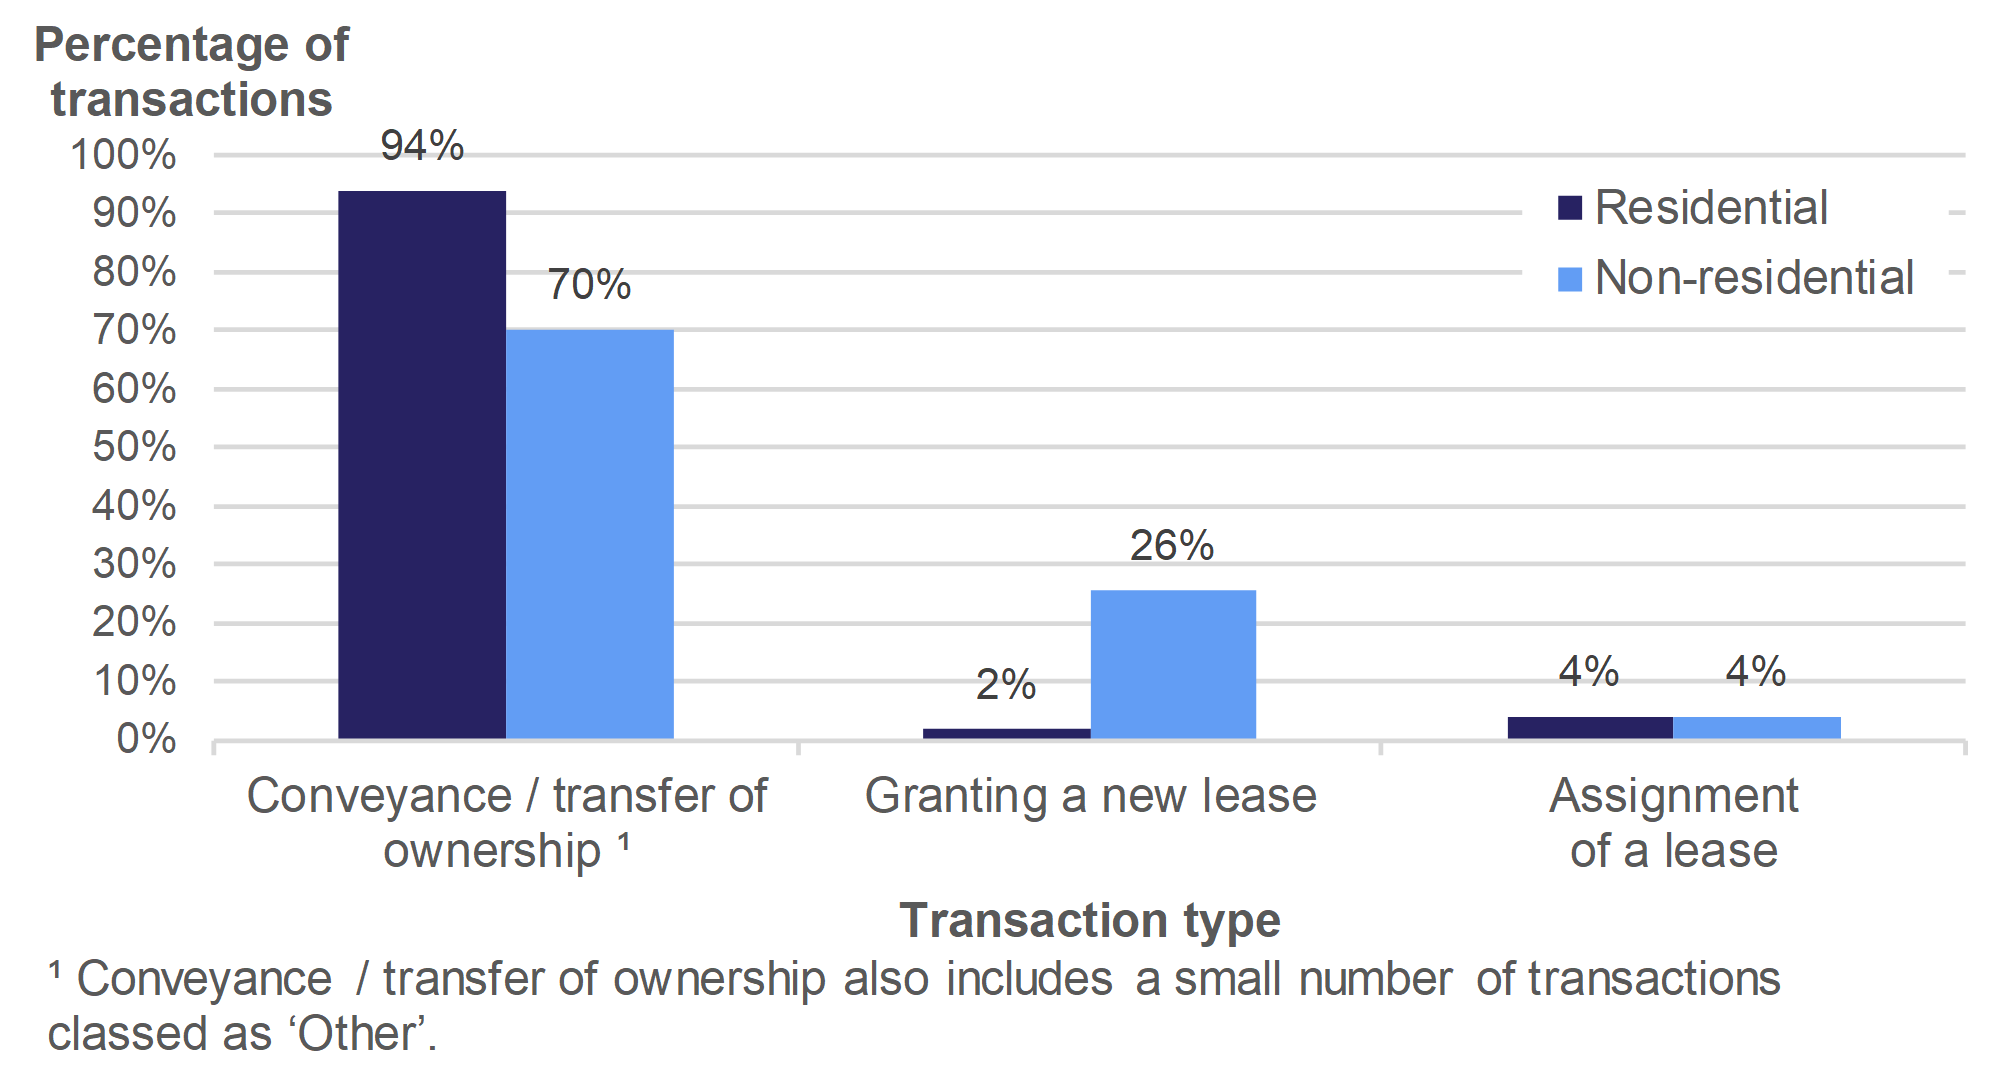 Figure 2.6 shows the percentage of transactions involving conveyance / transfer of ownership, granting of a new lease or assignment of a lease, for April to June 2019. Separate percentages are given for residential and non-residential transactions.